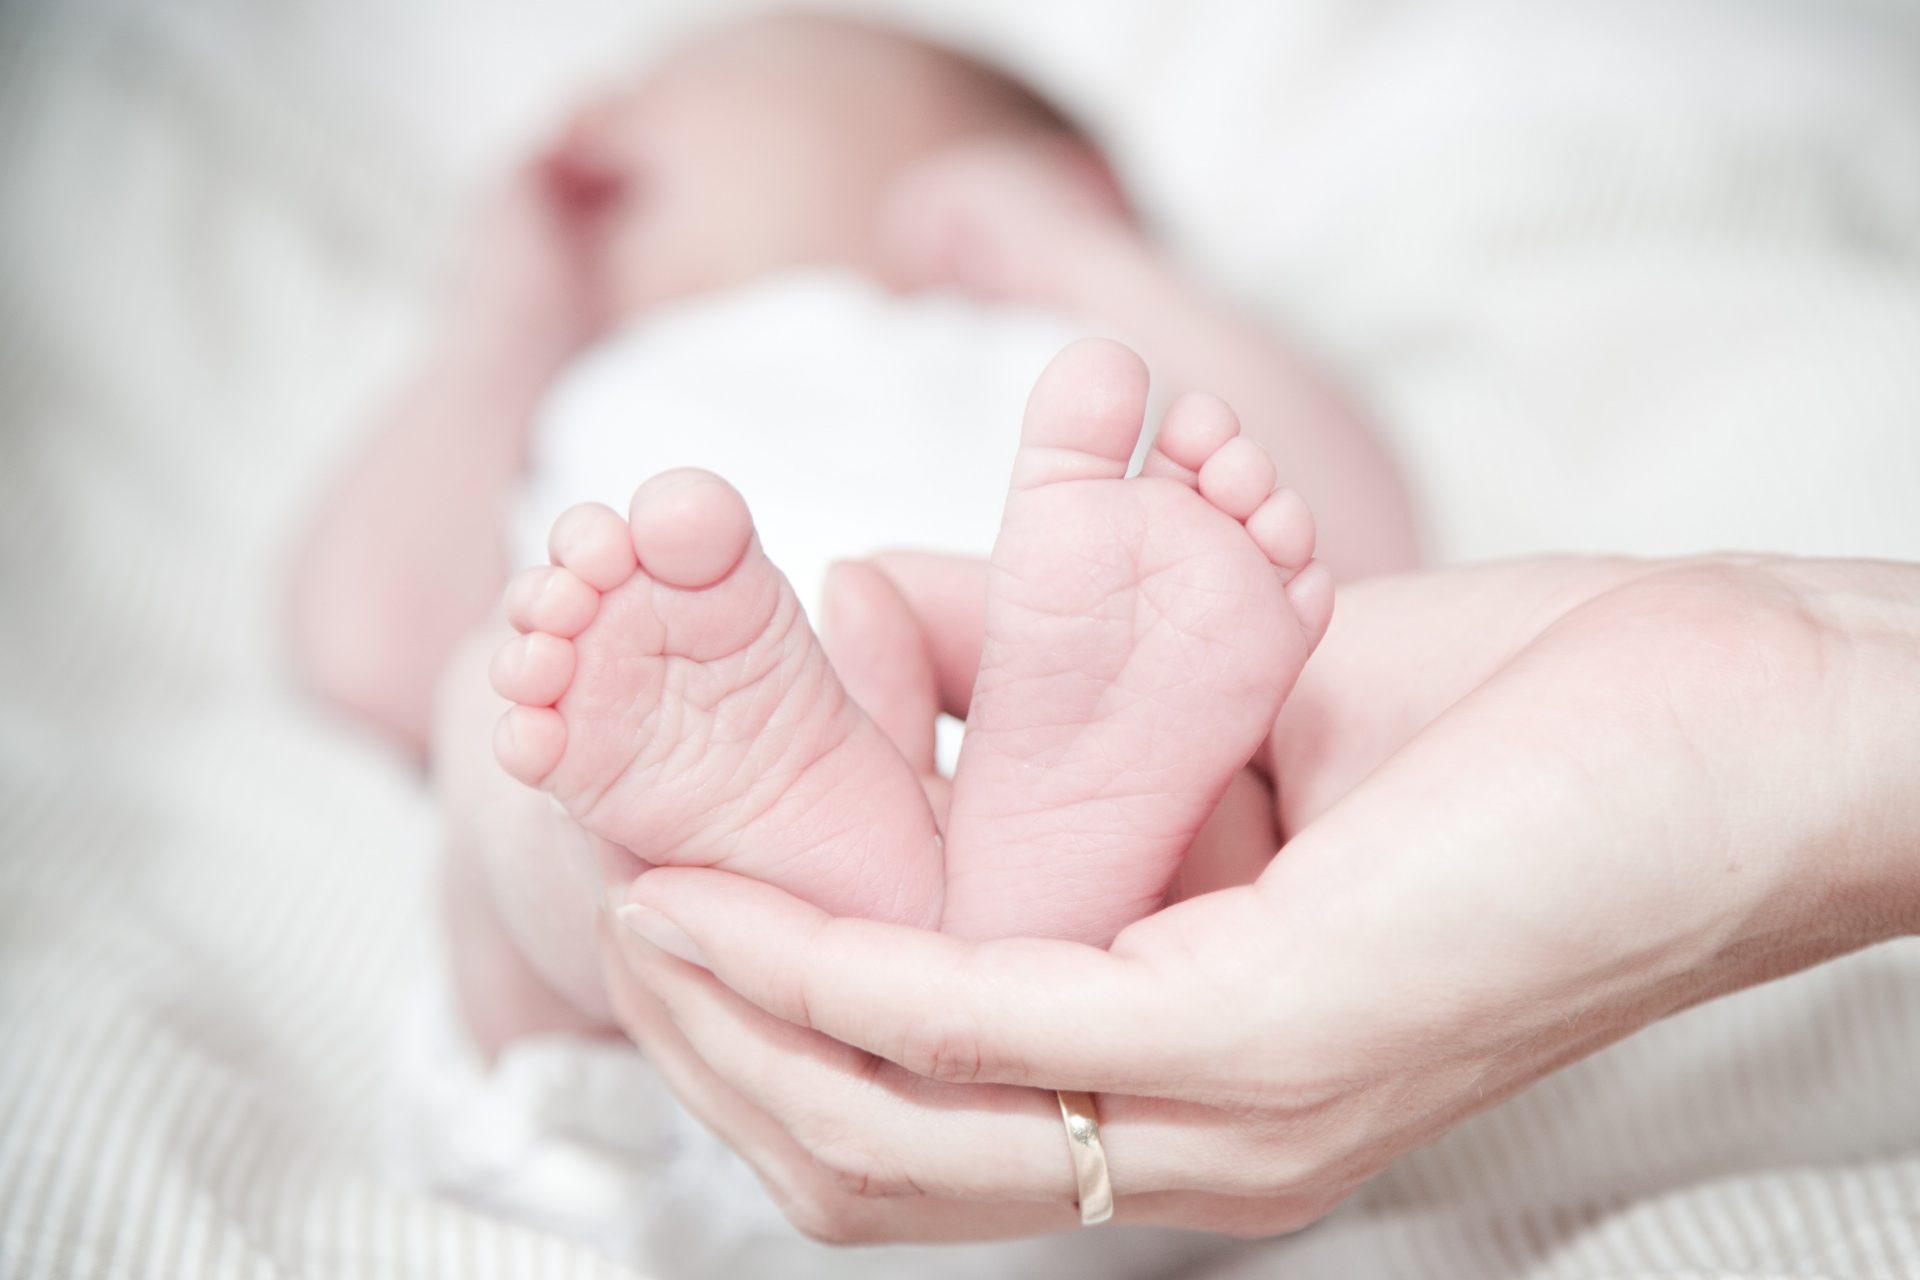 What is a Sure Start Maternity Grant and how do I claim it?